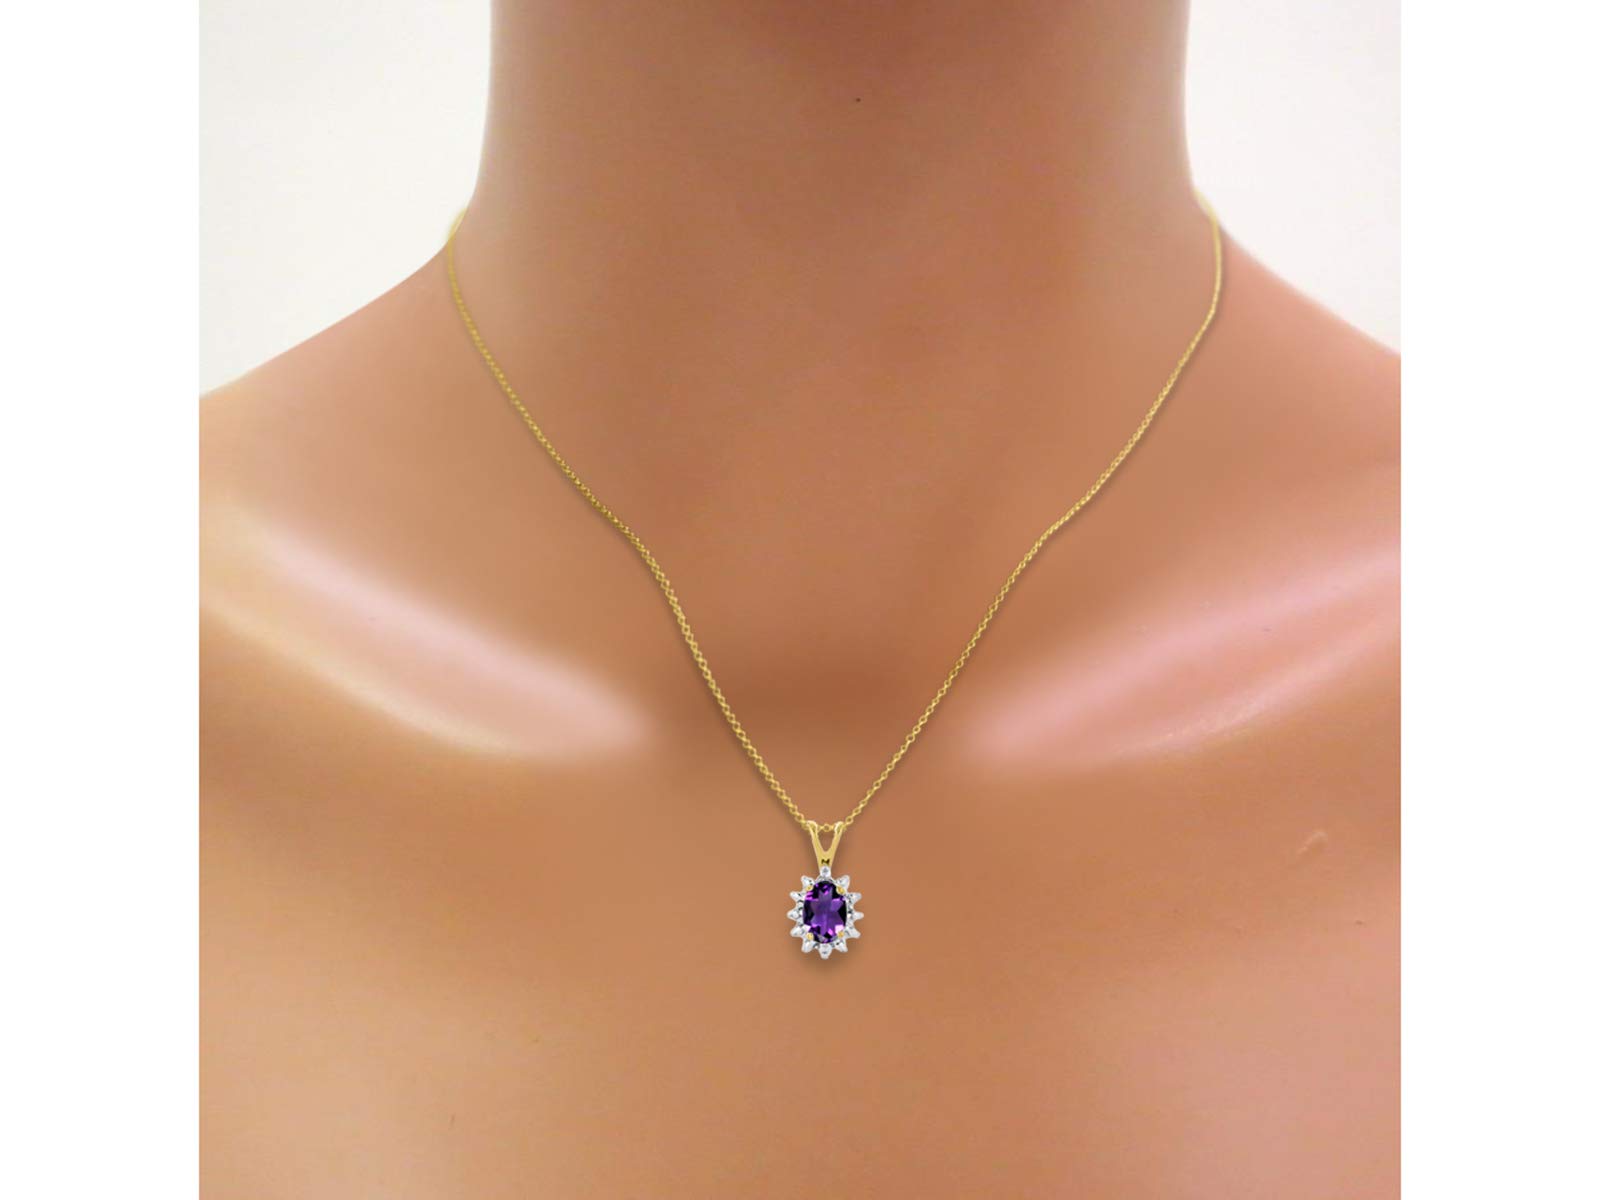 Rylos Simply Elegant Beautiful Amethyst & Diamond Matching Set - Ring, Earrings and Pendant Necklace - February Birthstone*